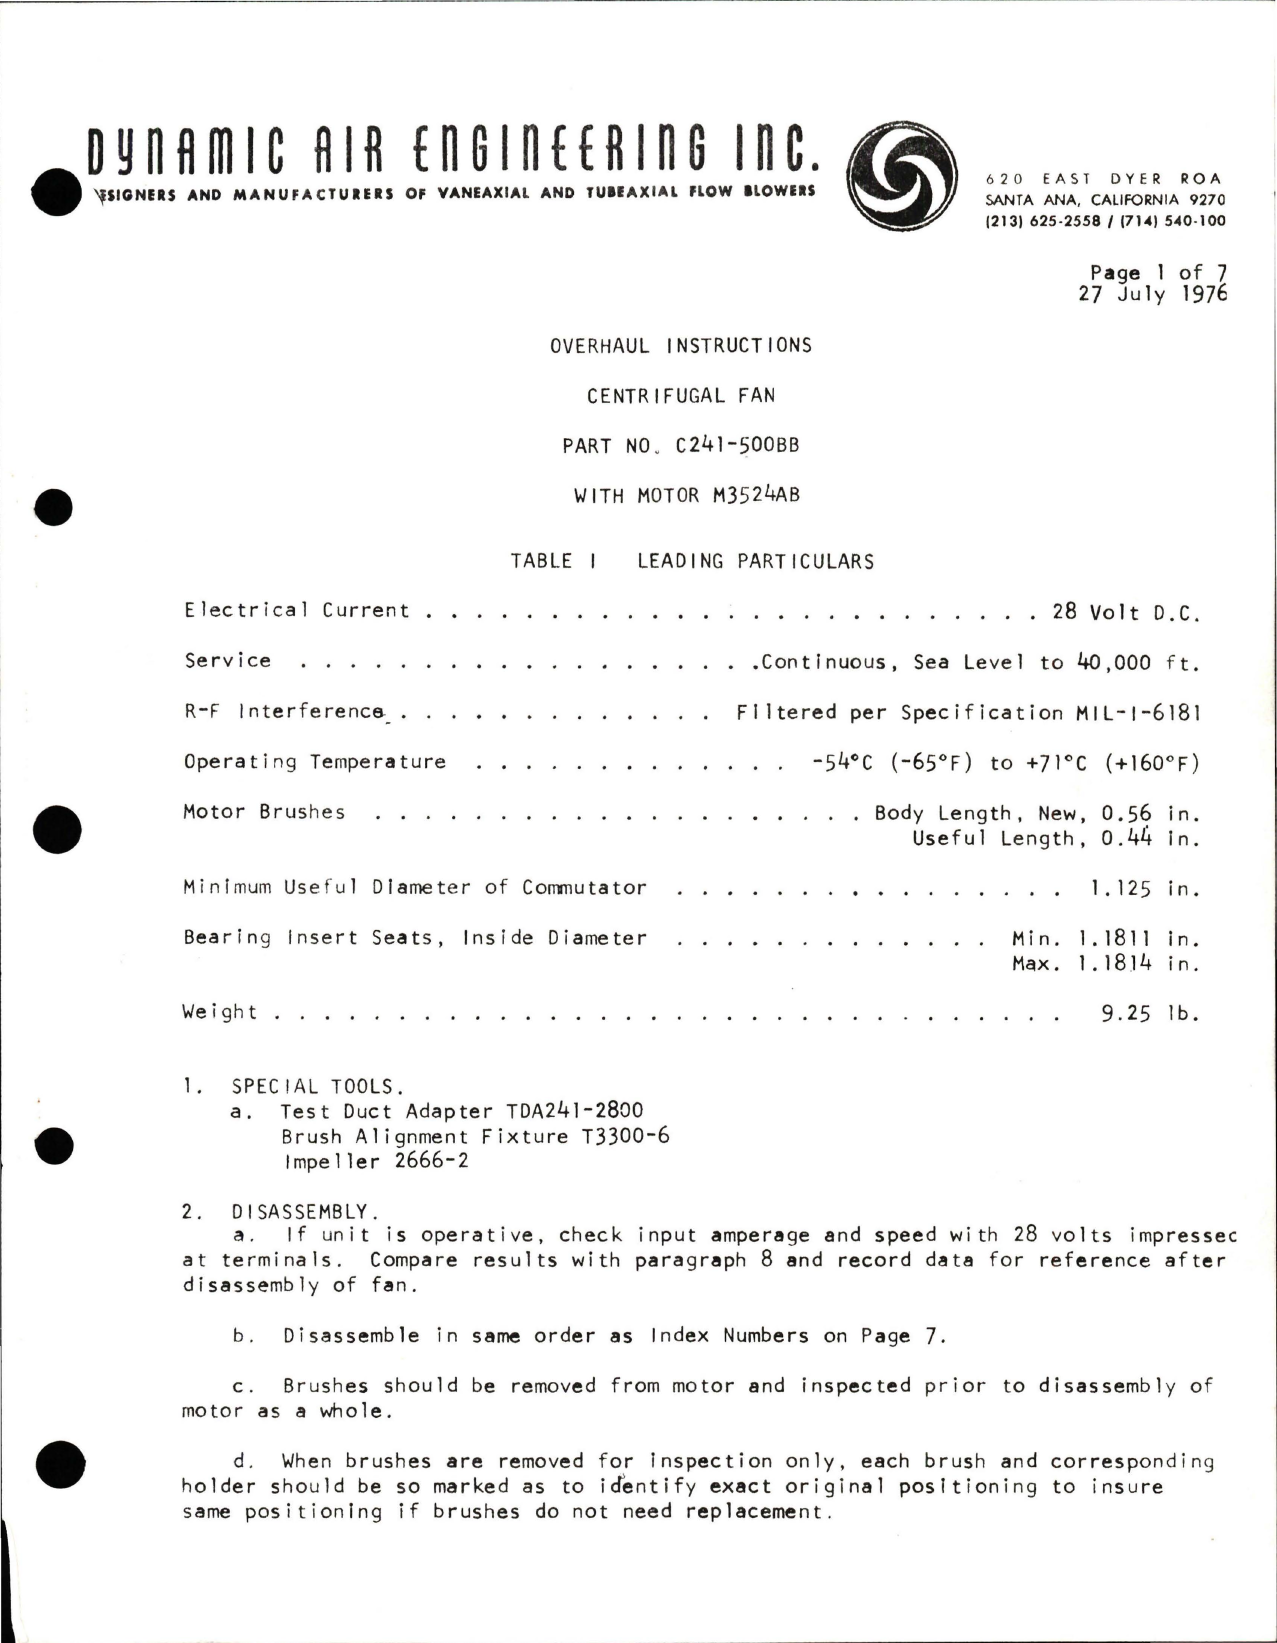 Sample page 1 from AirCorps Library document: Overhaul Instructions for Centrifugal Fan - Part C241-500BB - Motor M3524AB 